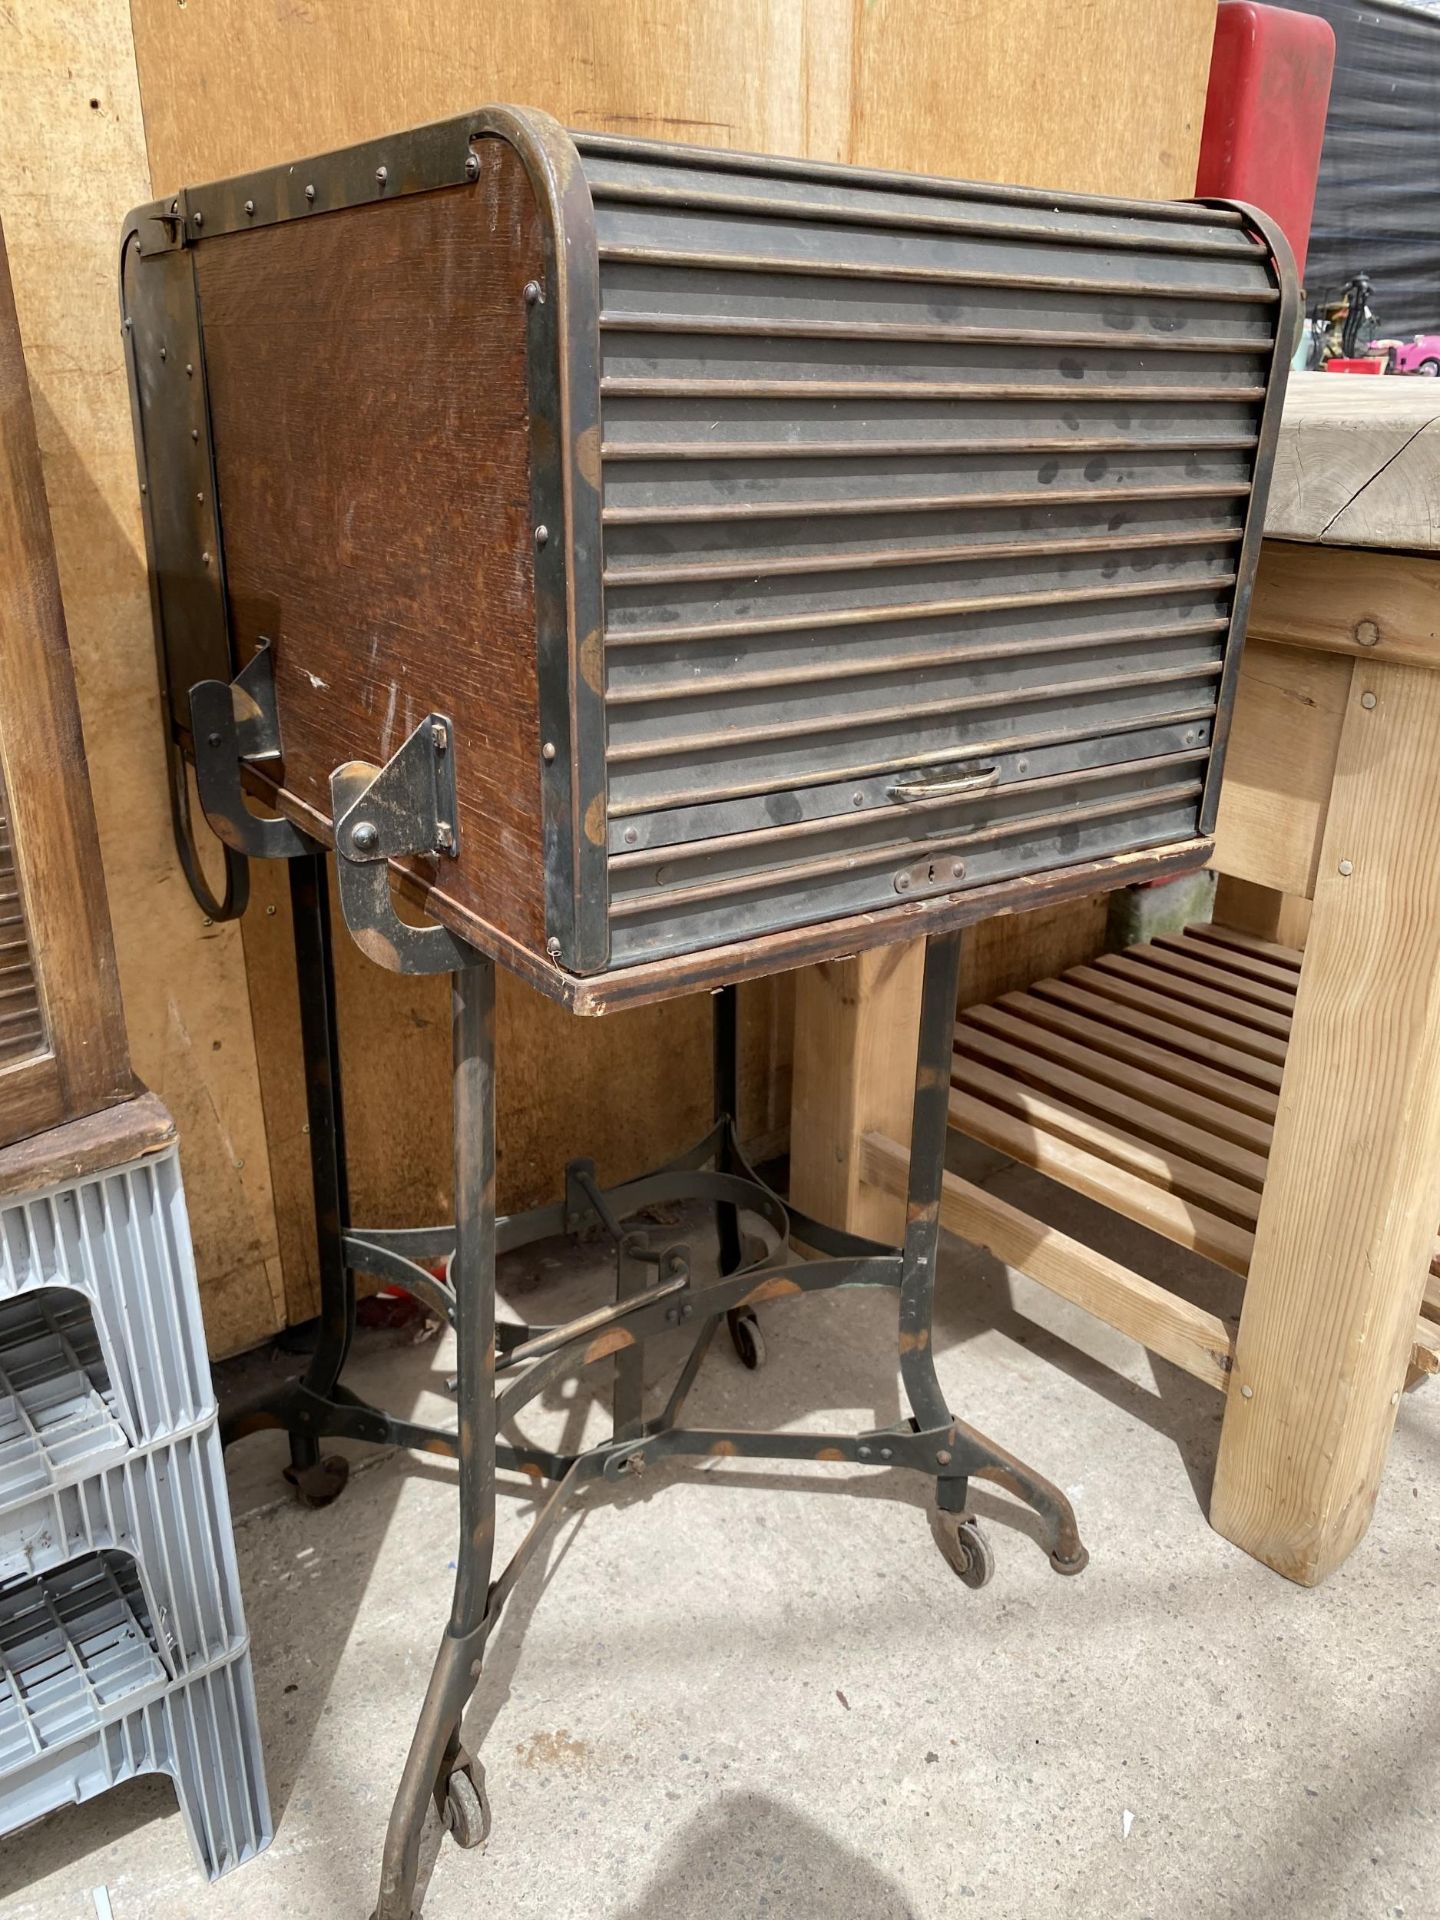 A VINTAGE OAK ROLL MACHINE TYPISTS CABINET WITH METAL INDUSTRIAL BASE - Image 2 of 4